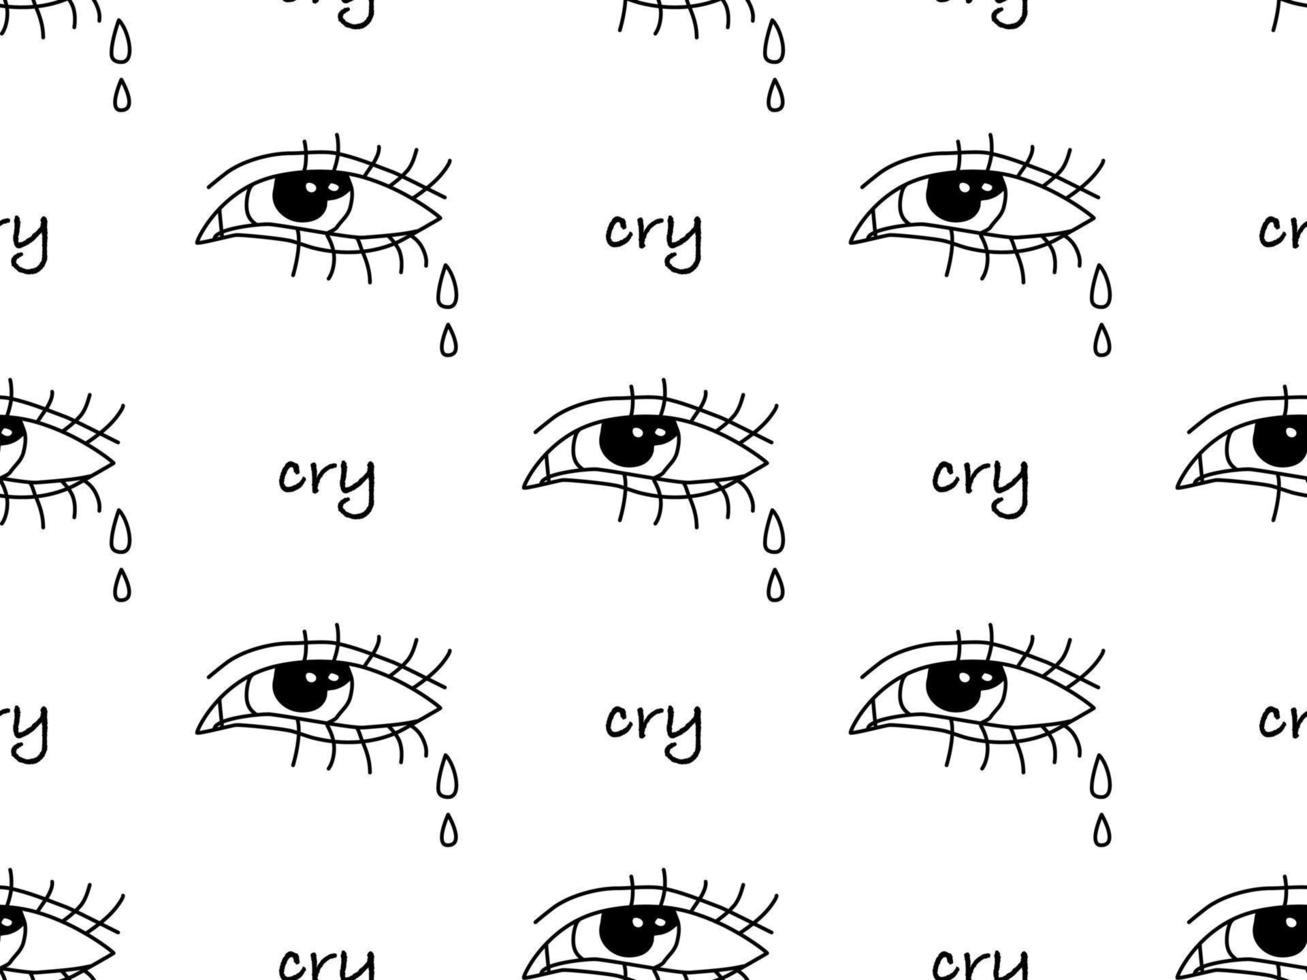 Cry cartoon character seamless pattern on white background vector